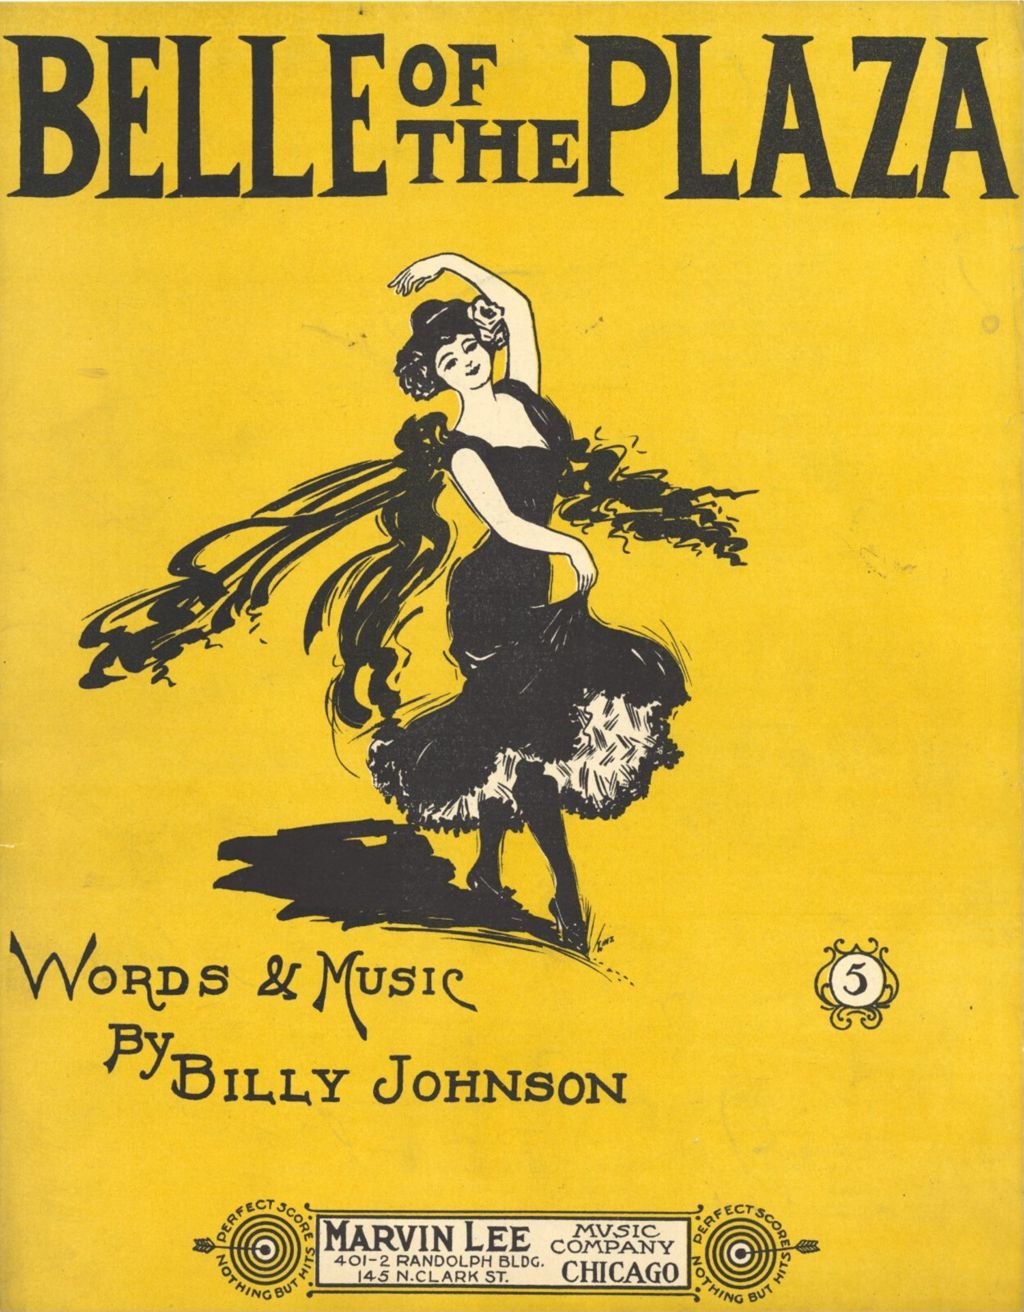 Miniature of Belle of The Plaza